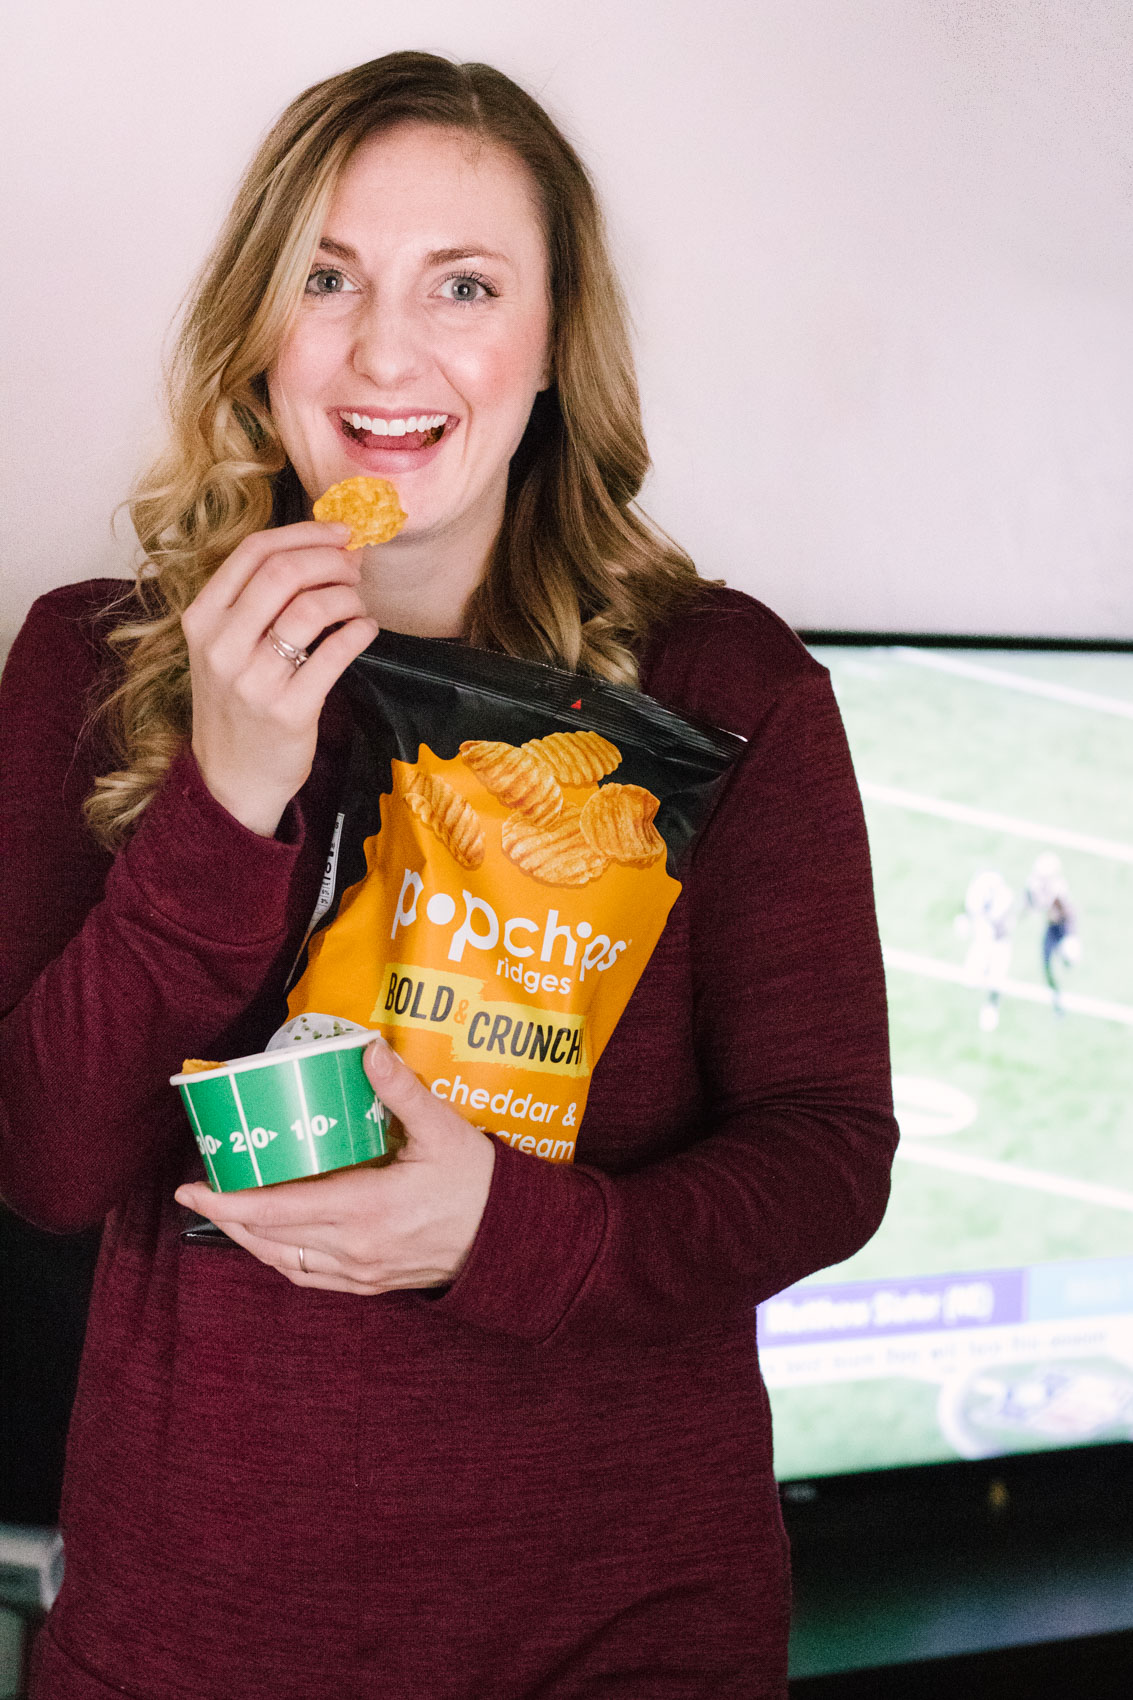 Snacks make me SO happy and while football isn't my favorite thing, I'll definitely show up for the food. Also known as gluten-free bags of goodness, popchips are a great pick for when you're deciding on ideas for Super Bowl snacks!